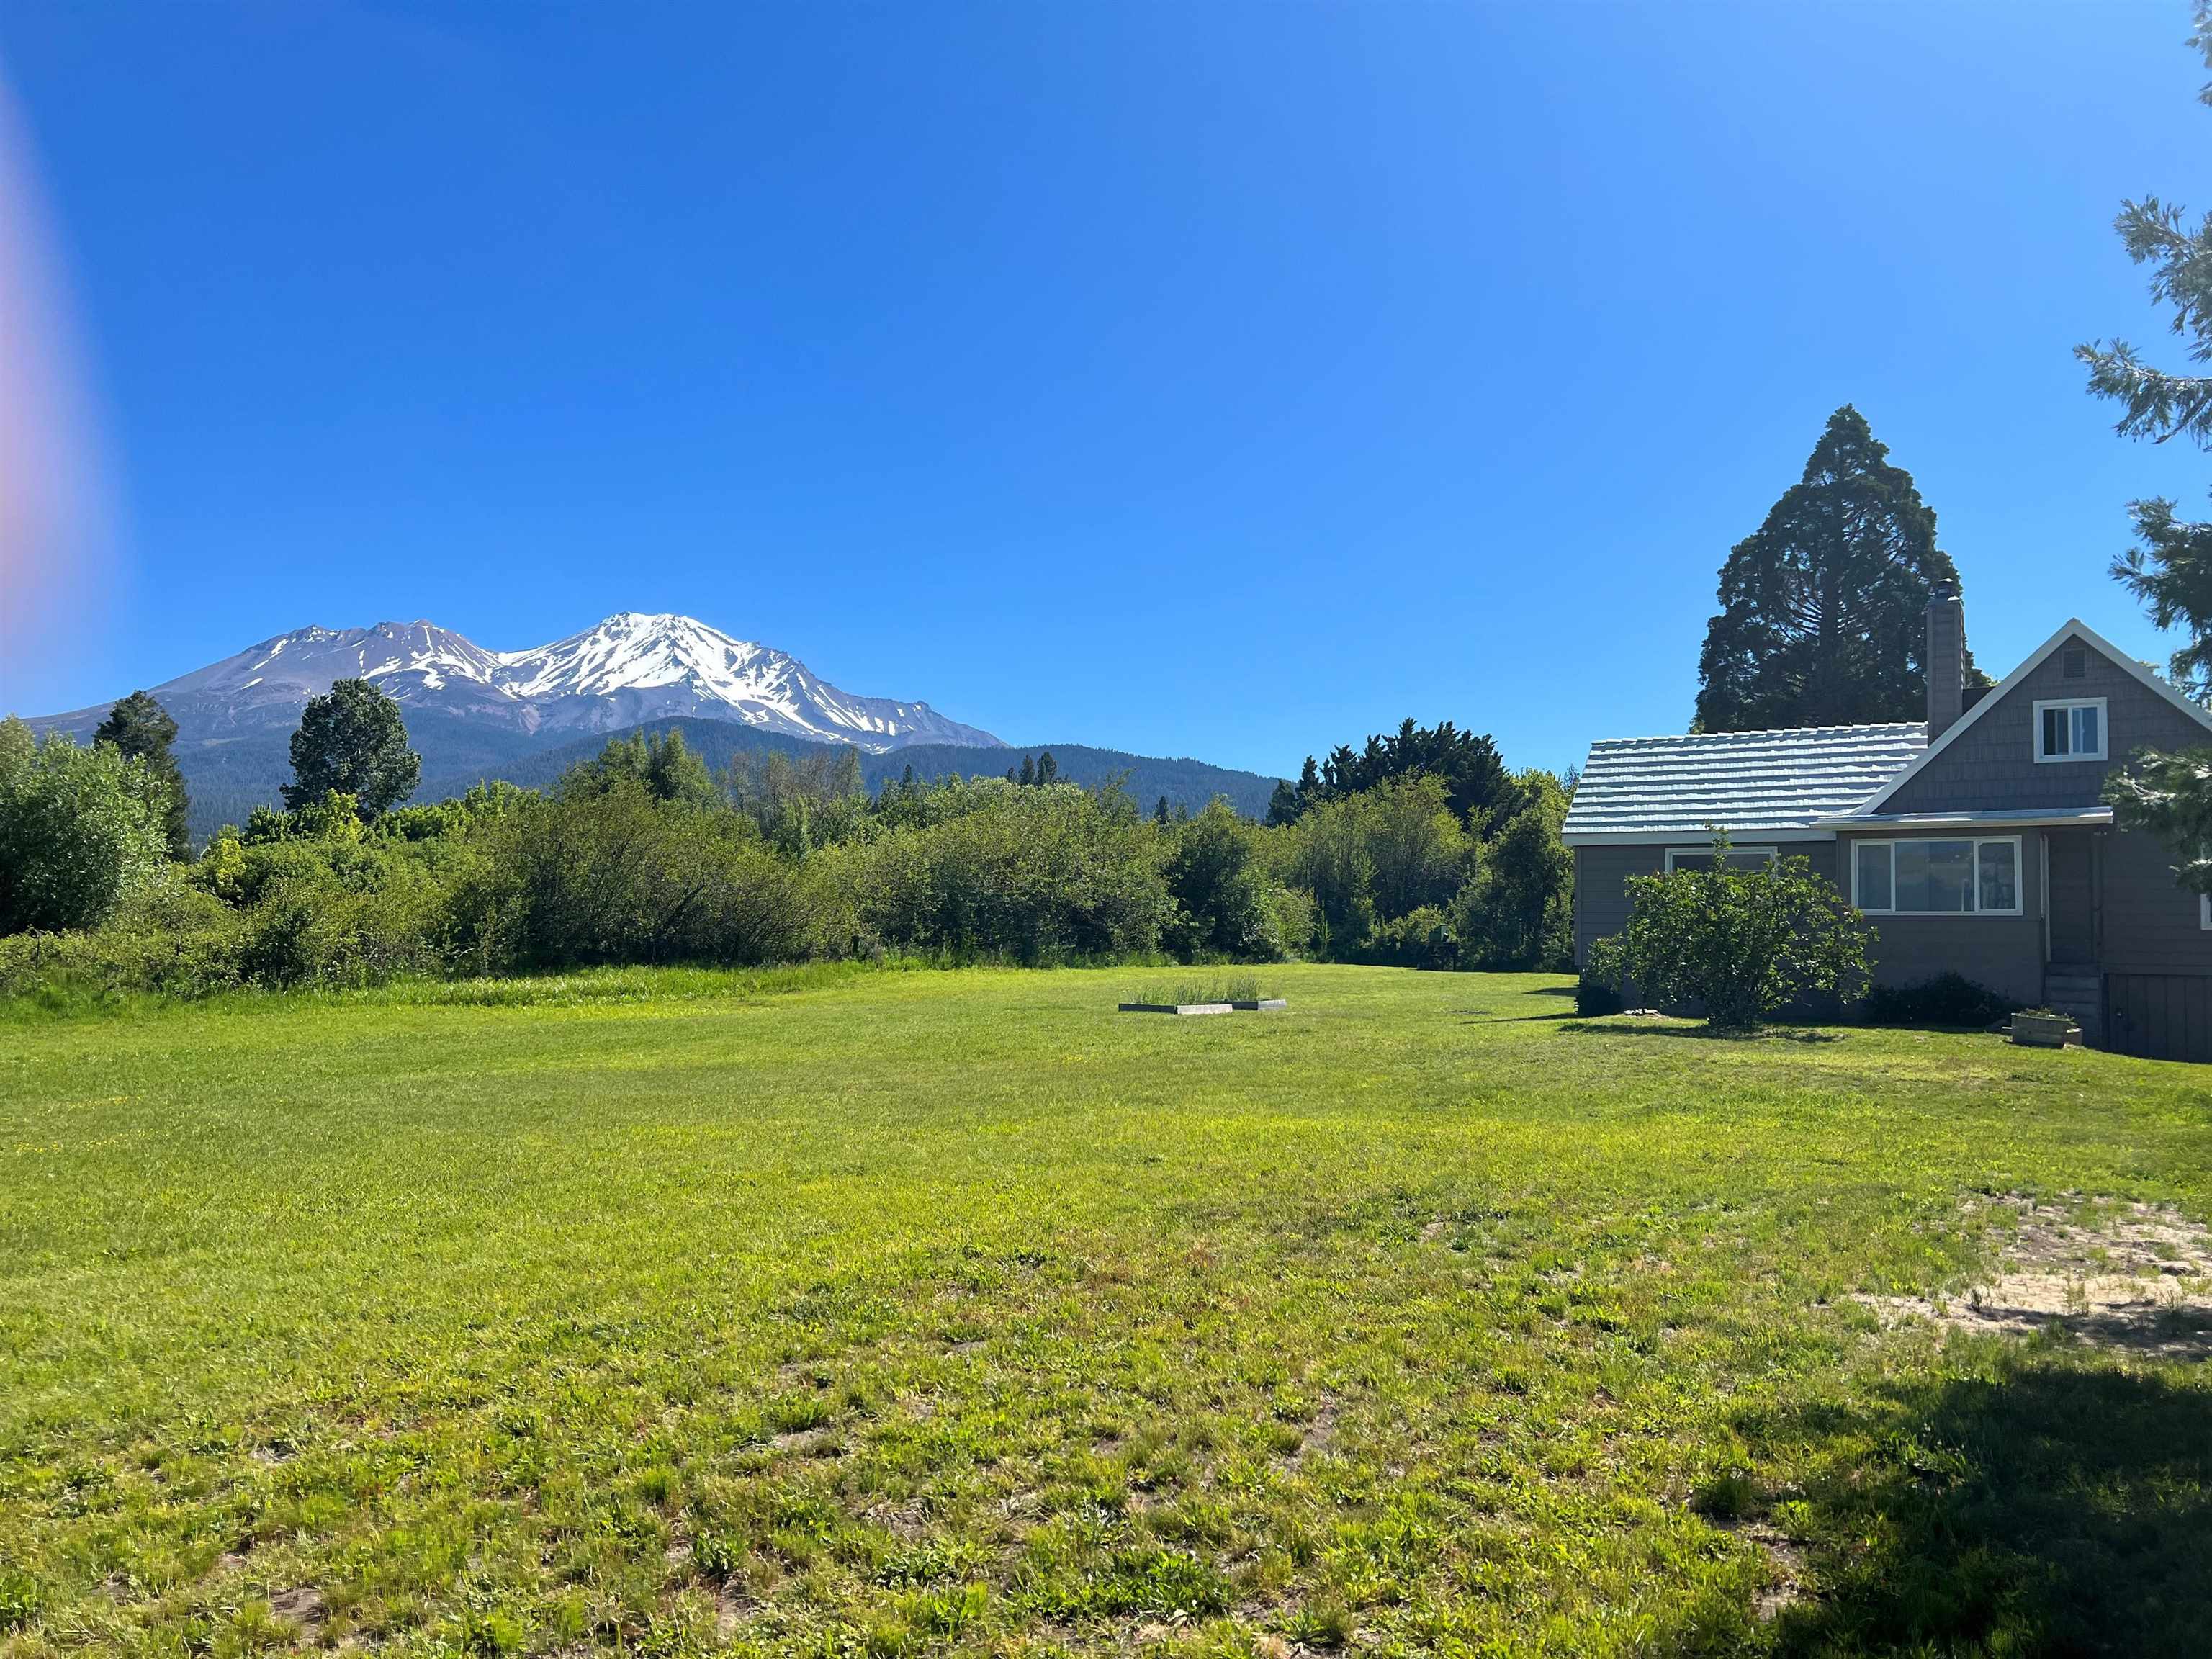 Location, location, location!  3 lots all zoned commercial with amazing views of both Mt. Shasta and the Eddy Mountains.  Just think of the opportunities these lots have to offer.  The house has been partially remodeled and features an updated kitchen and bathroom. The main living room is light and bright and open to the kitchen. The upstairs bedroom and living area features windows with views on both ends of the house. Large basement for storage with drive in underground garage.   Just minutes from Lake Siskiyou, Mt. Shasta Resort and Mt. Shasta Ski Park.  This amazing property is located in town and could make for a great home or income property.   Just think of the potential !!!!